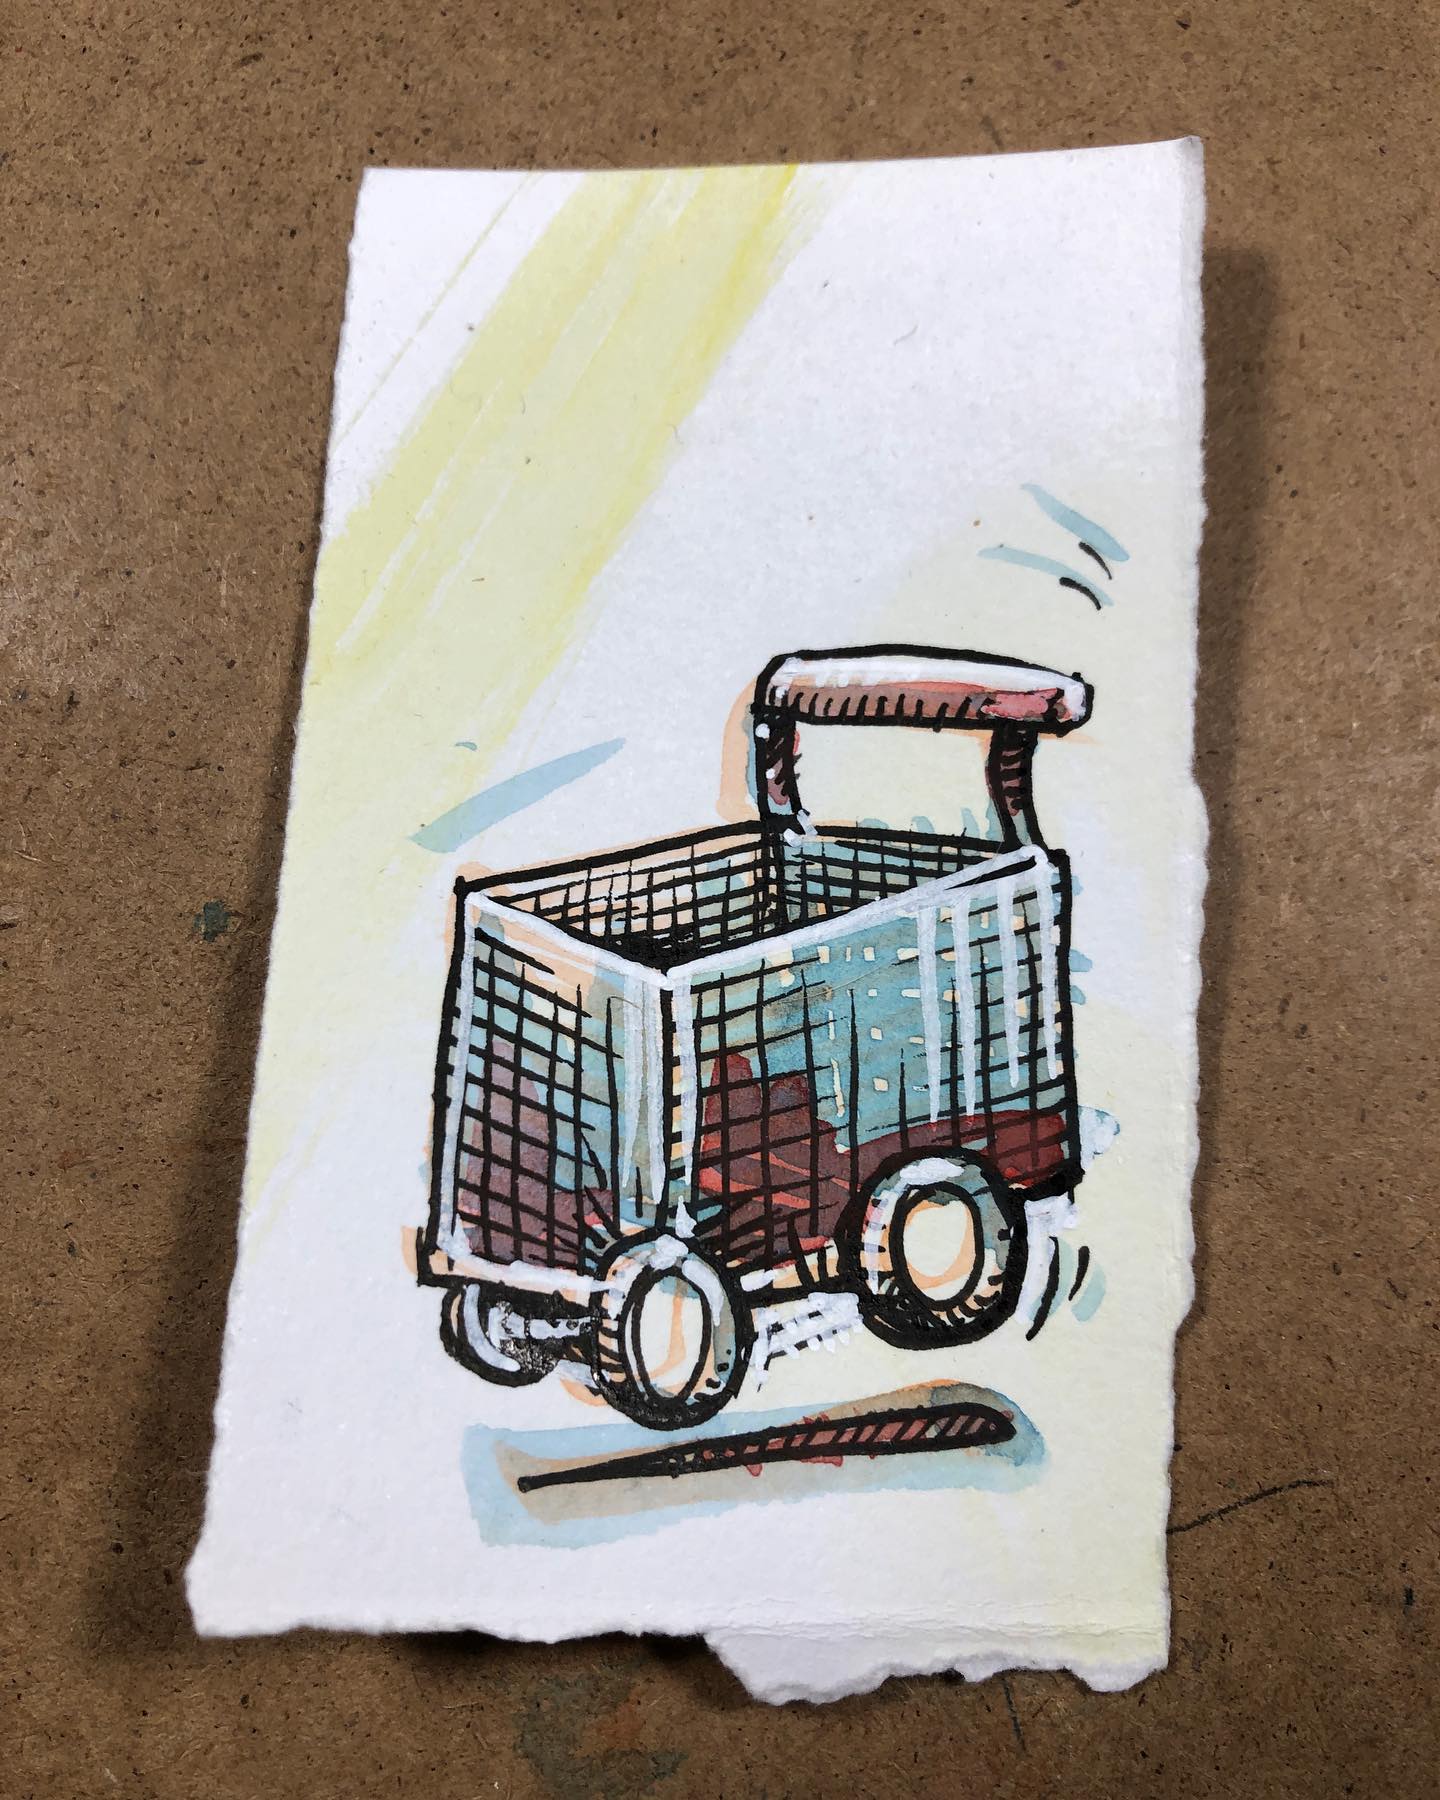 Jankey watercolor/ink drawing of a bouncing shopping cart